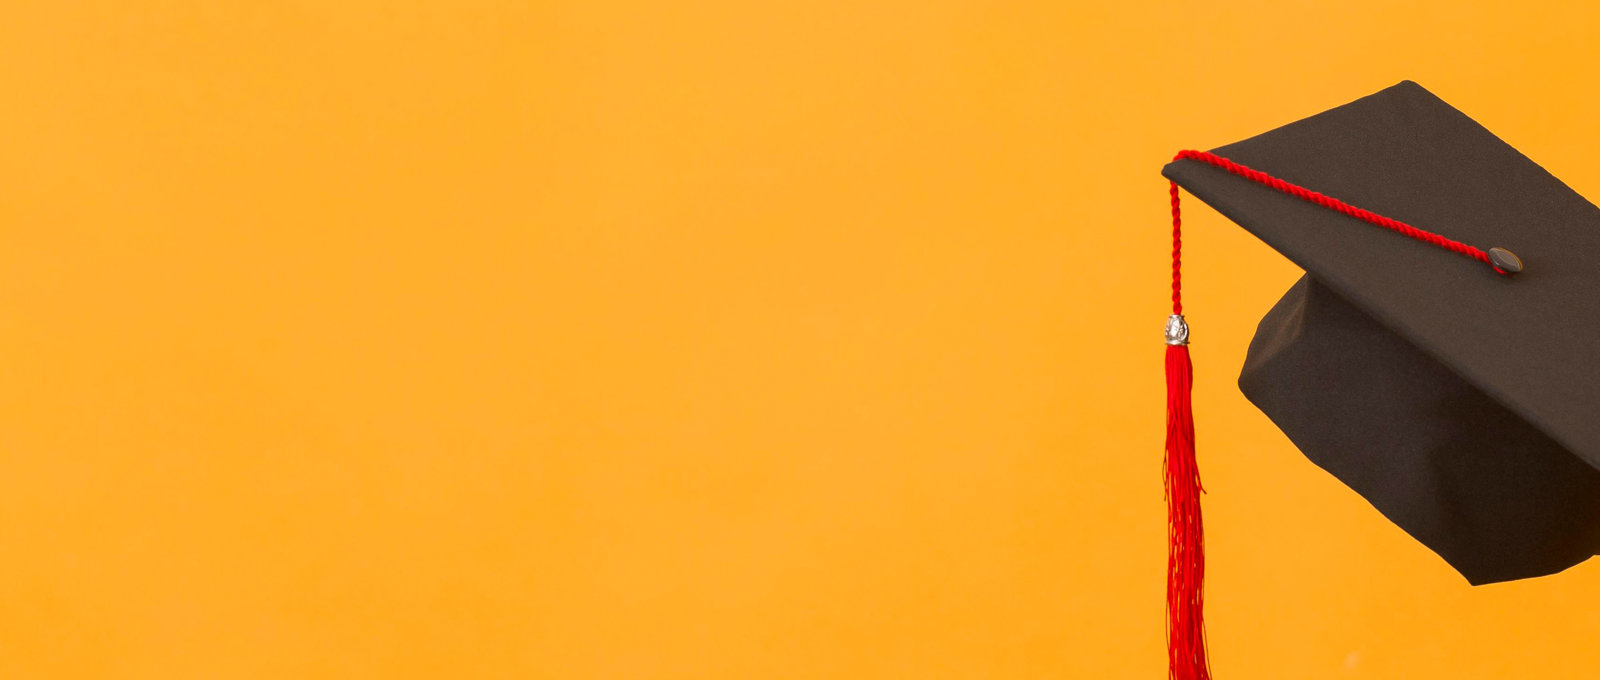 Close-up photo of a graduate's mortar board against an orange background